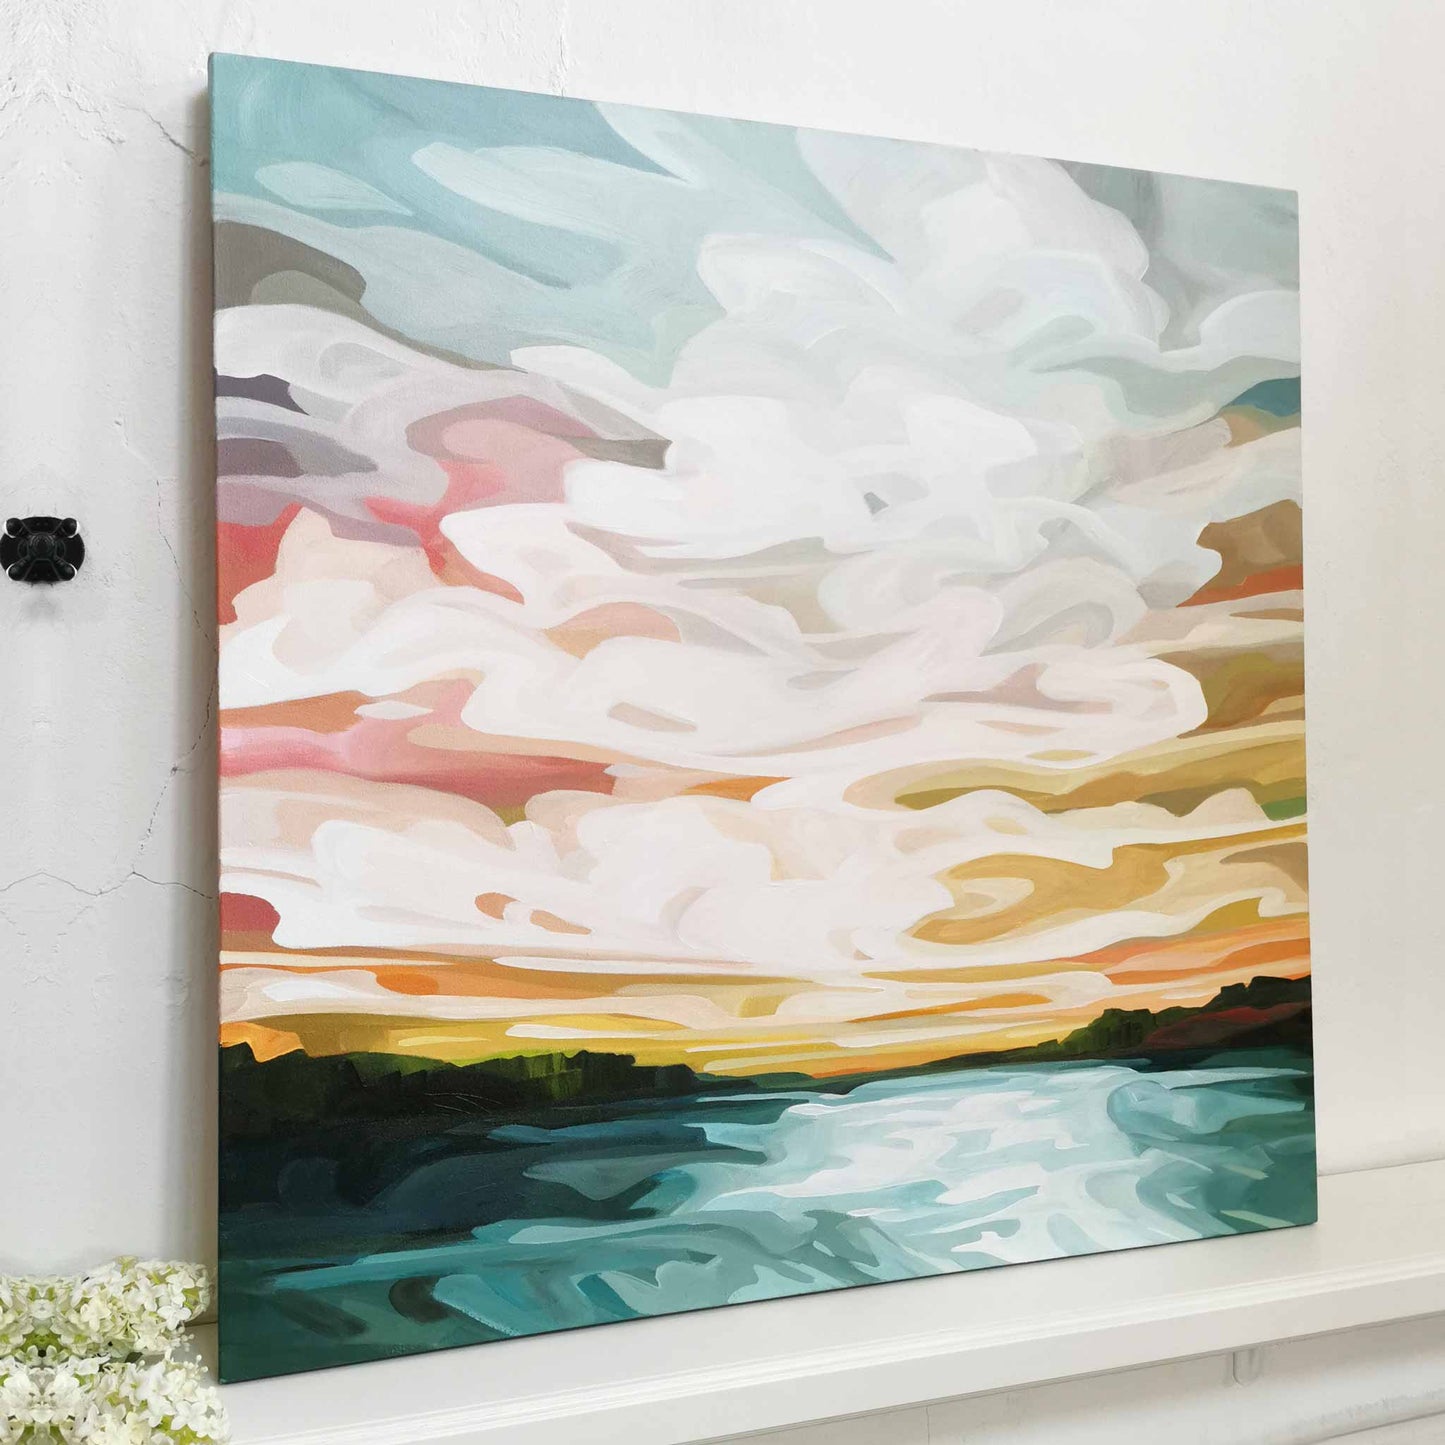 Sunrise painting by Canadian abstract artist Susannah Bleasby of an aurora sky painting